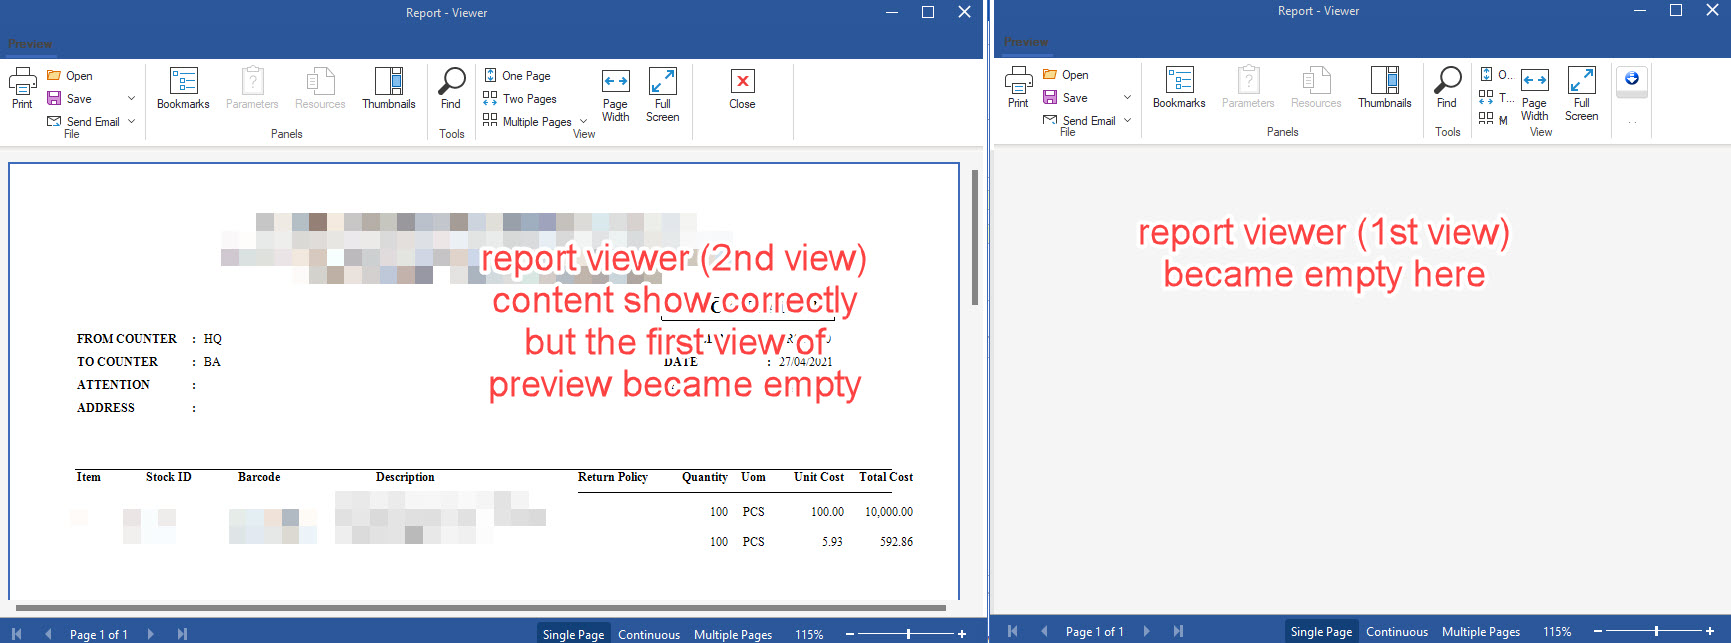 ShowWithRibbonGUI - Report - Viewer - Previous Report Viewer became empty.jpg